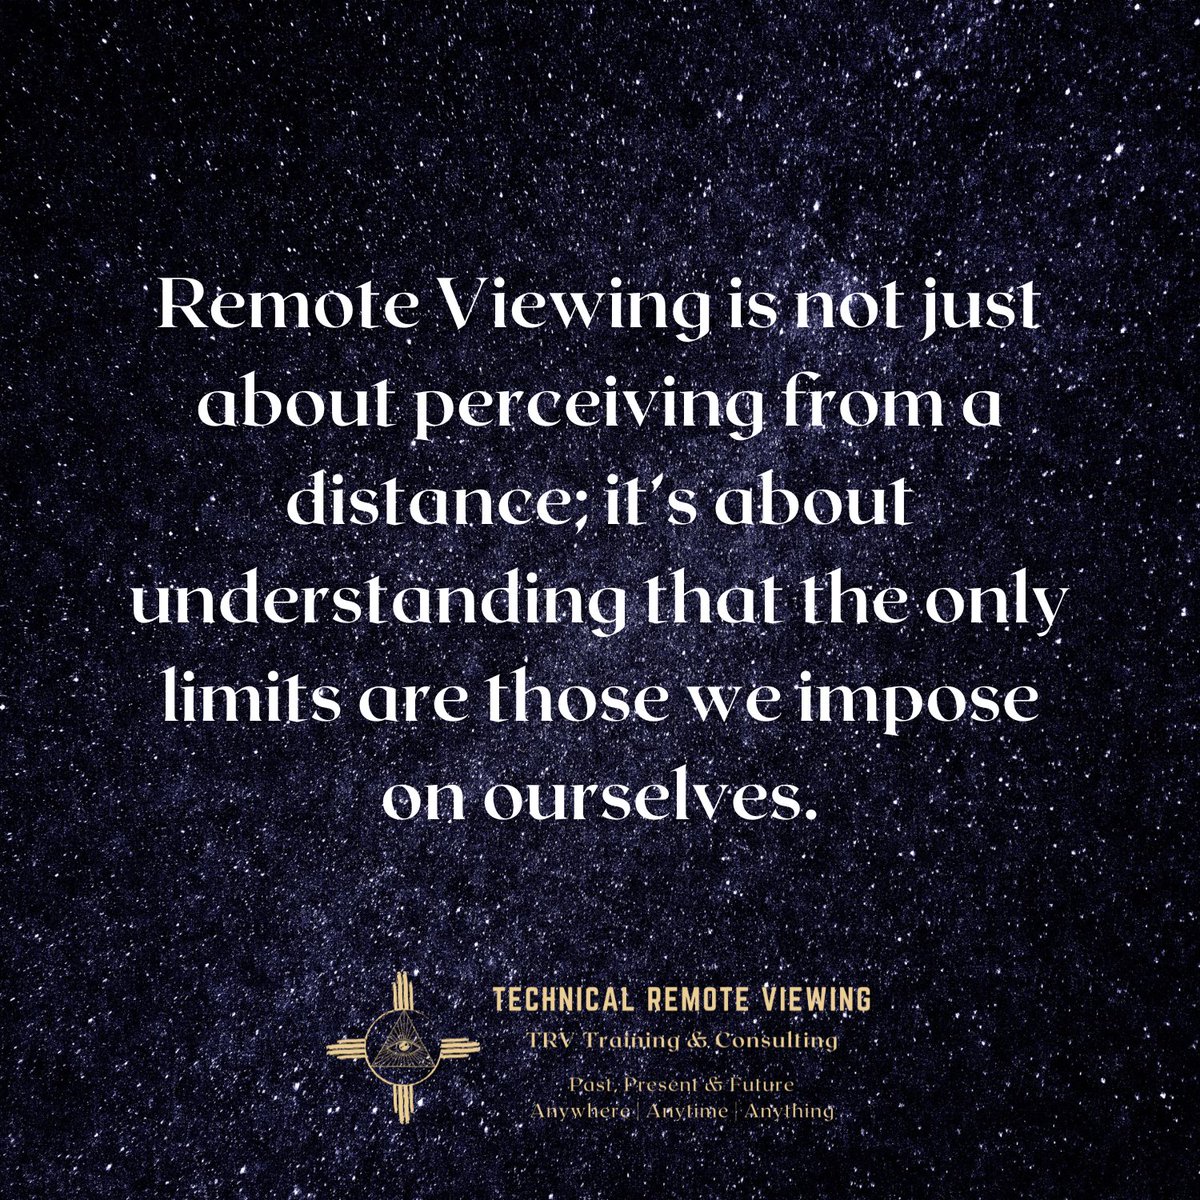 No matter what you think you are... you are always more than that!
No matter what you think Remote Viewing is... it's always more than that!
TRV - There are NO SECRETS!!!
#remoteviewing #remoteviewer #personaldevelopment #Psychic